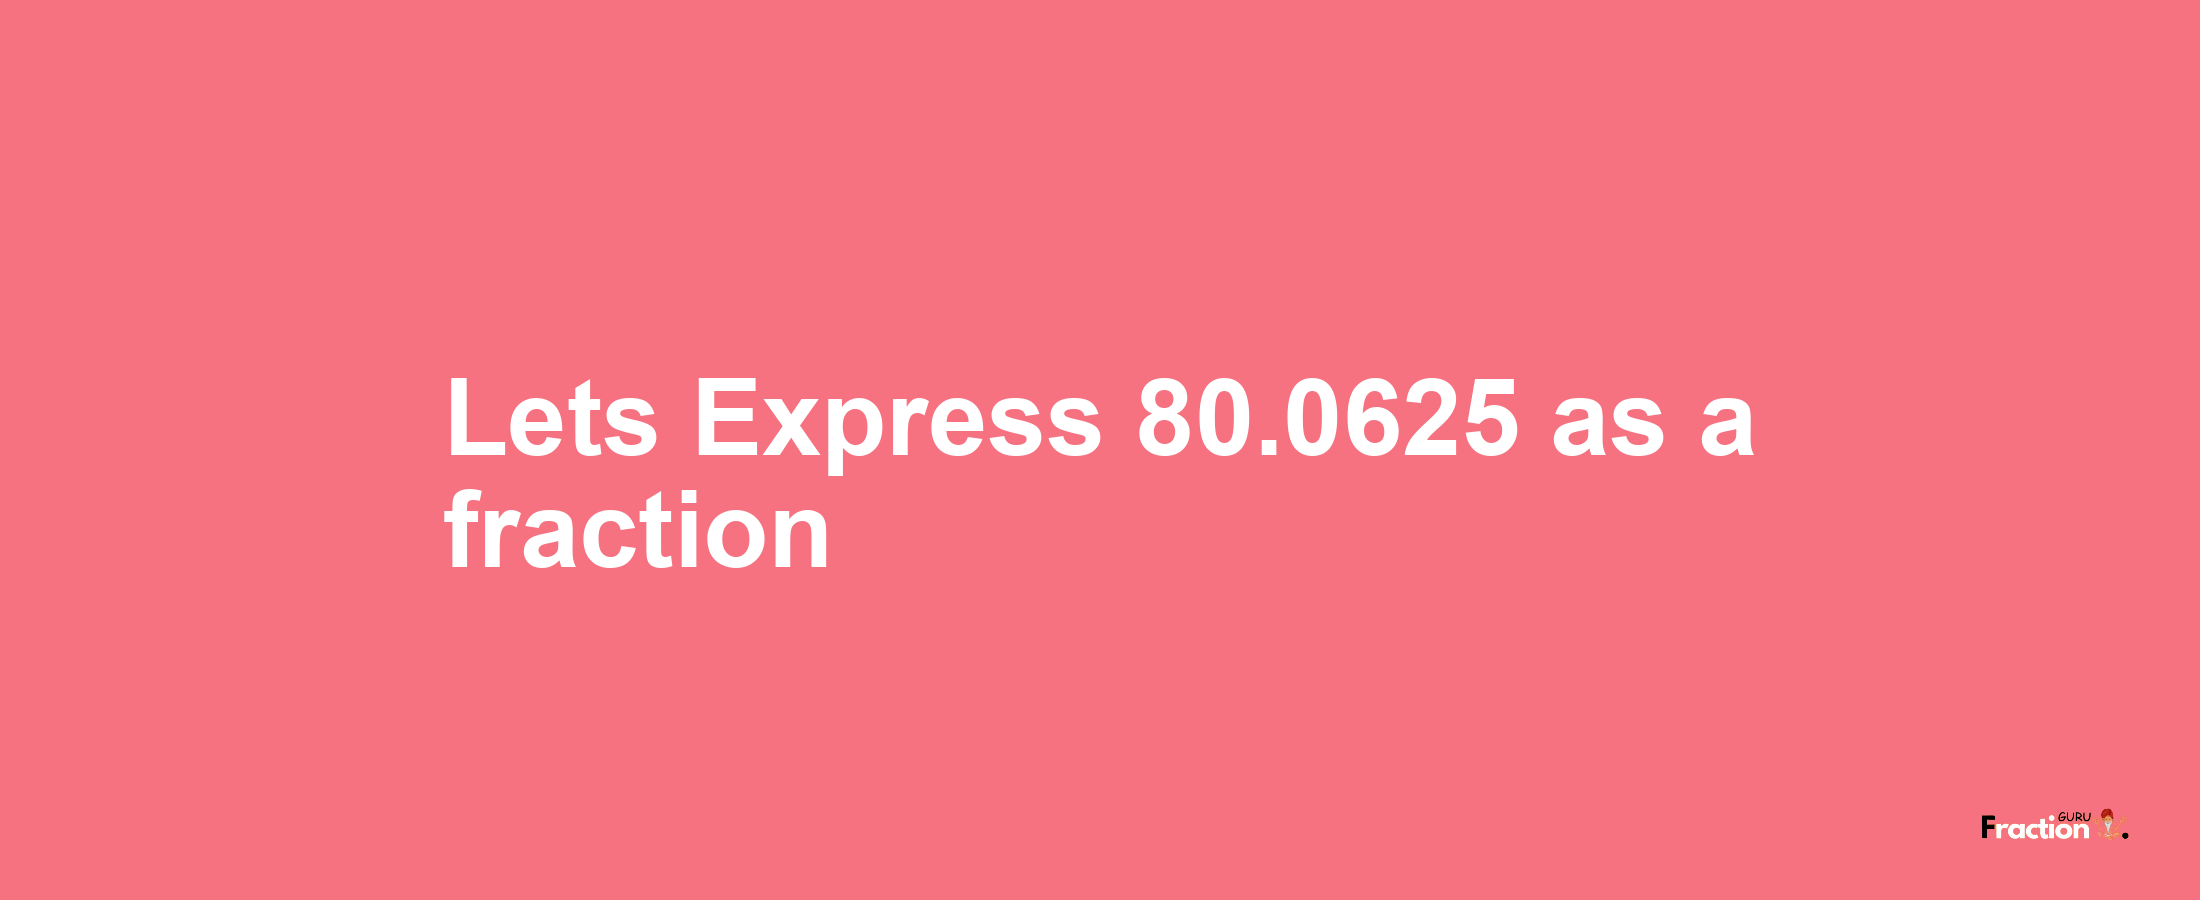 Lets Express 80.0625 as afraction